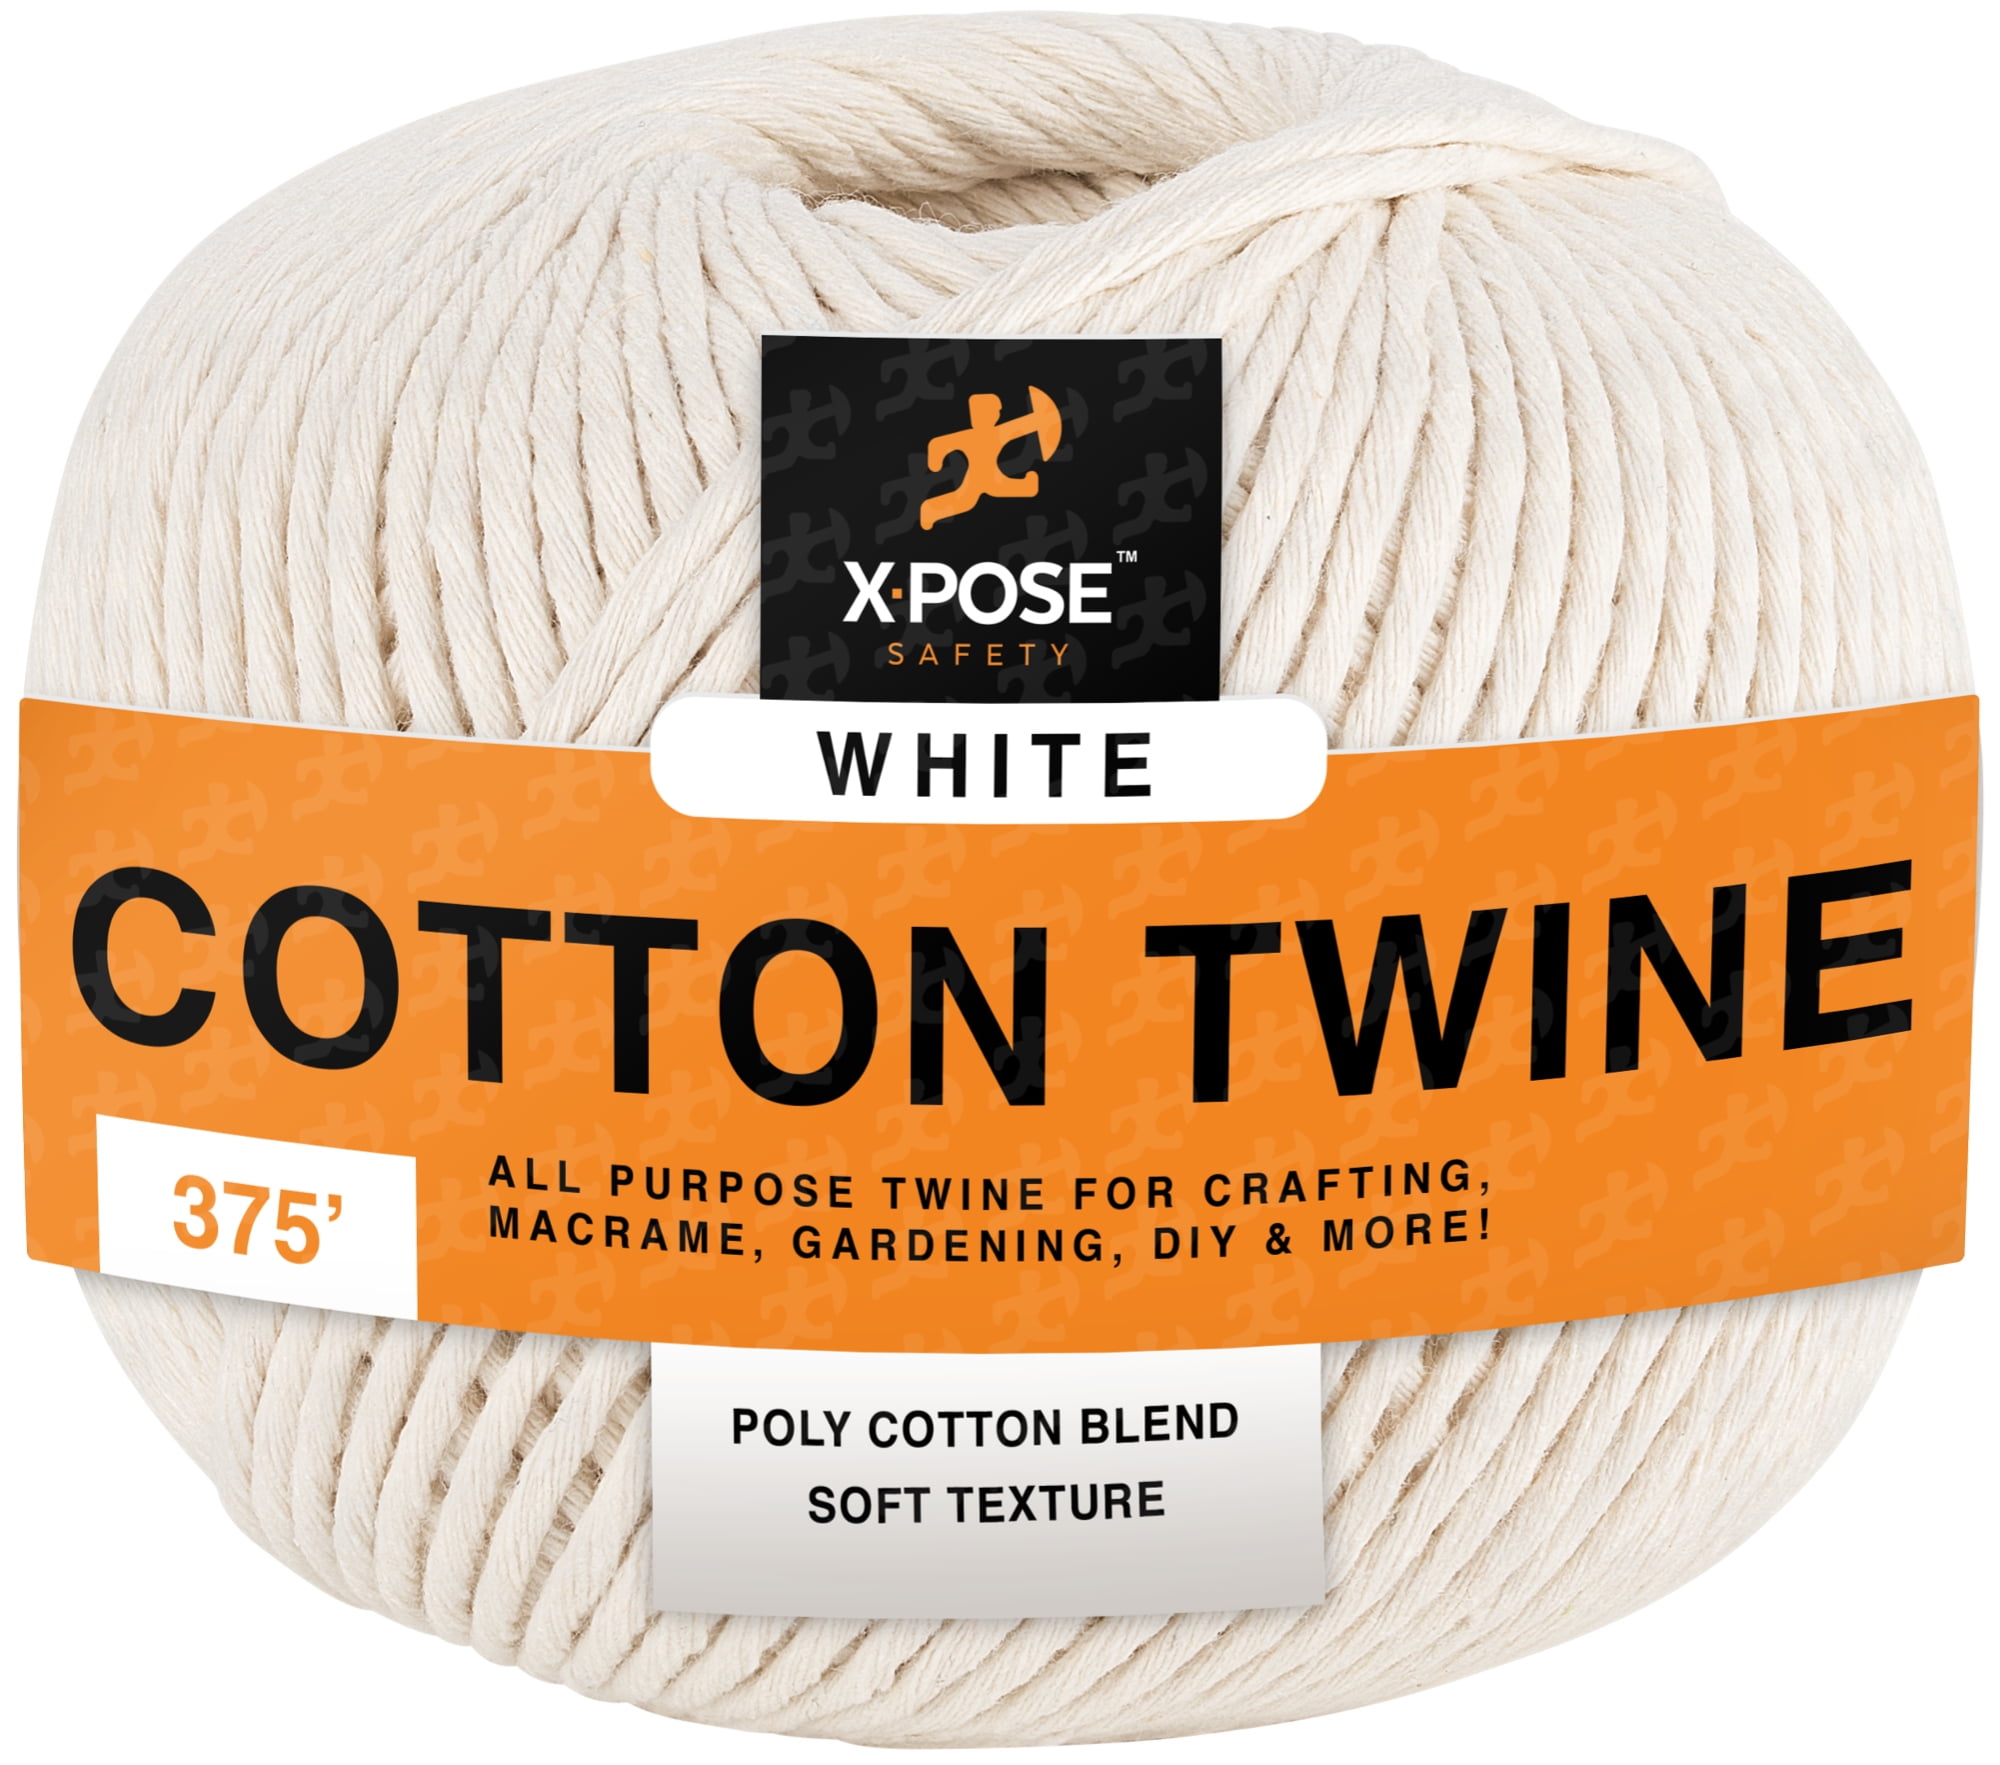 Cotton Twine - Food Grade Cotton String Ball - Bakers Twine